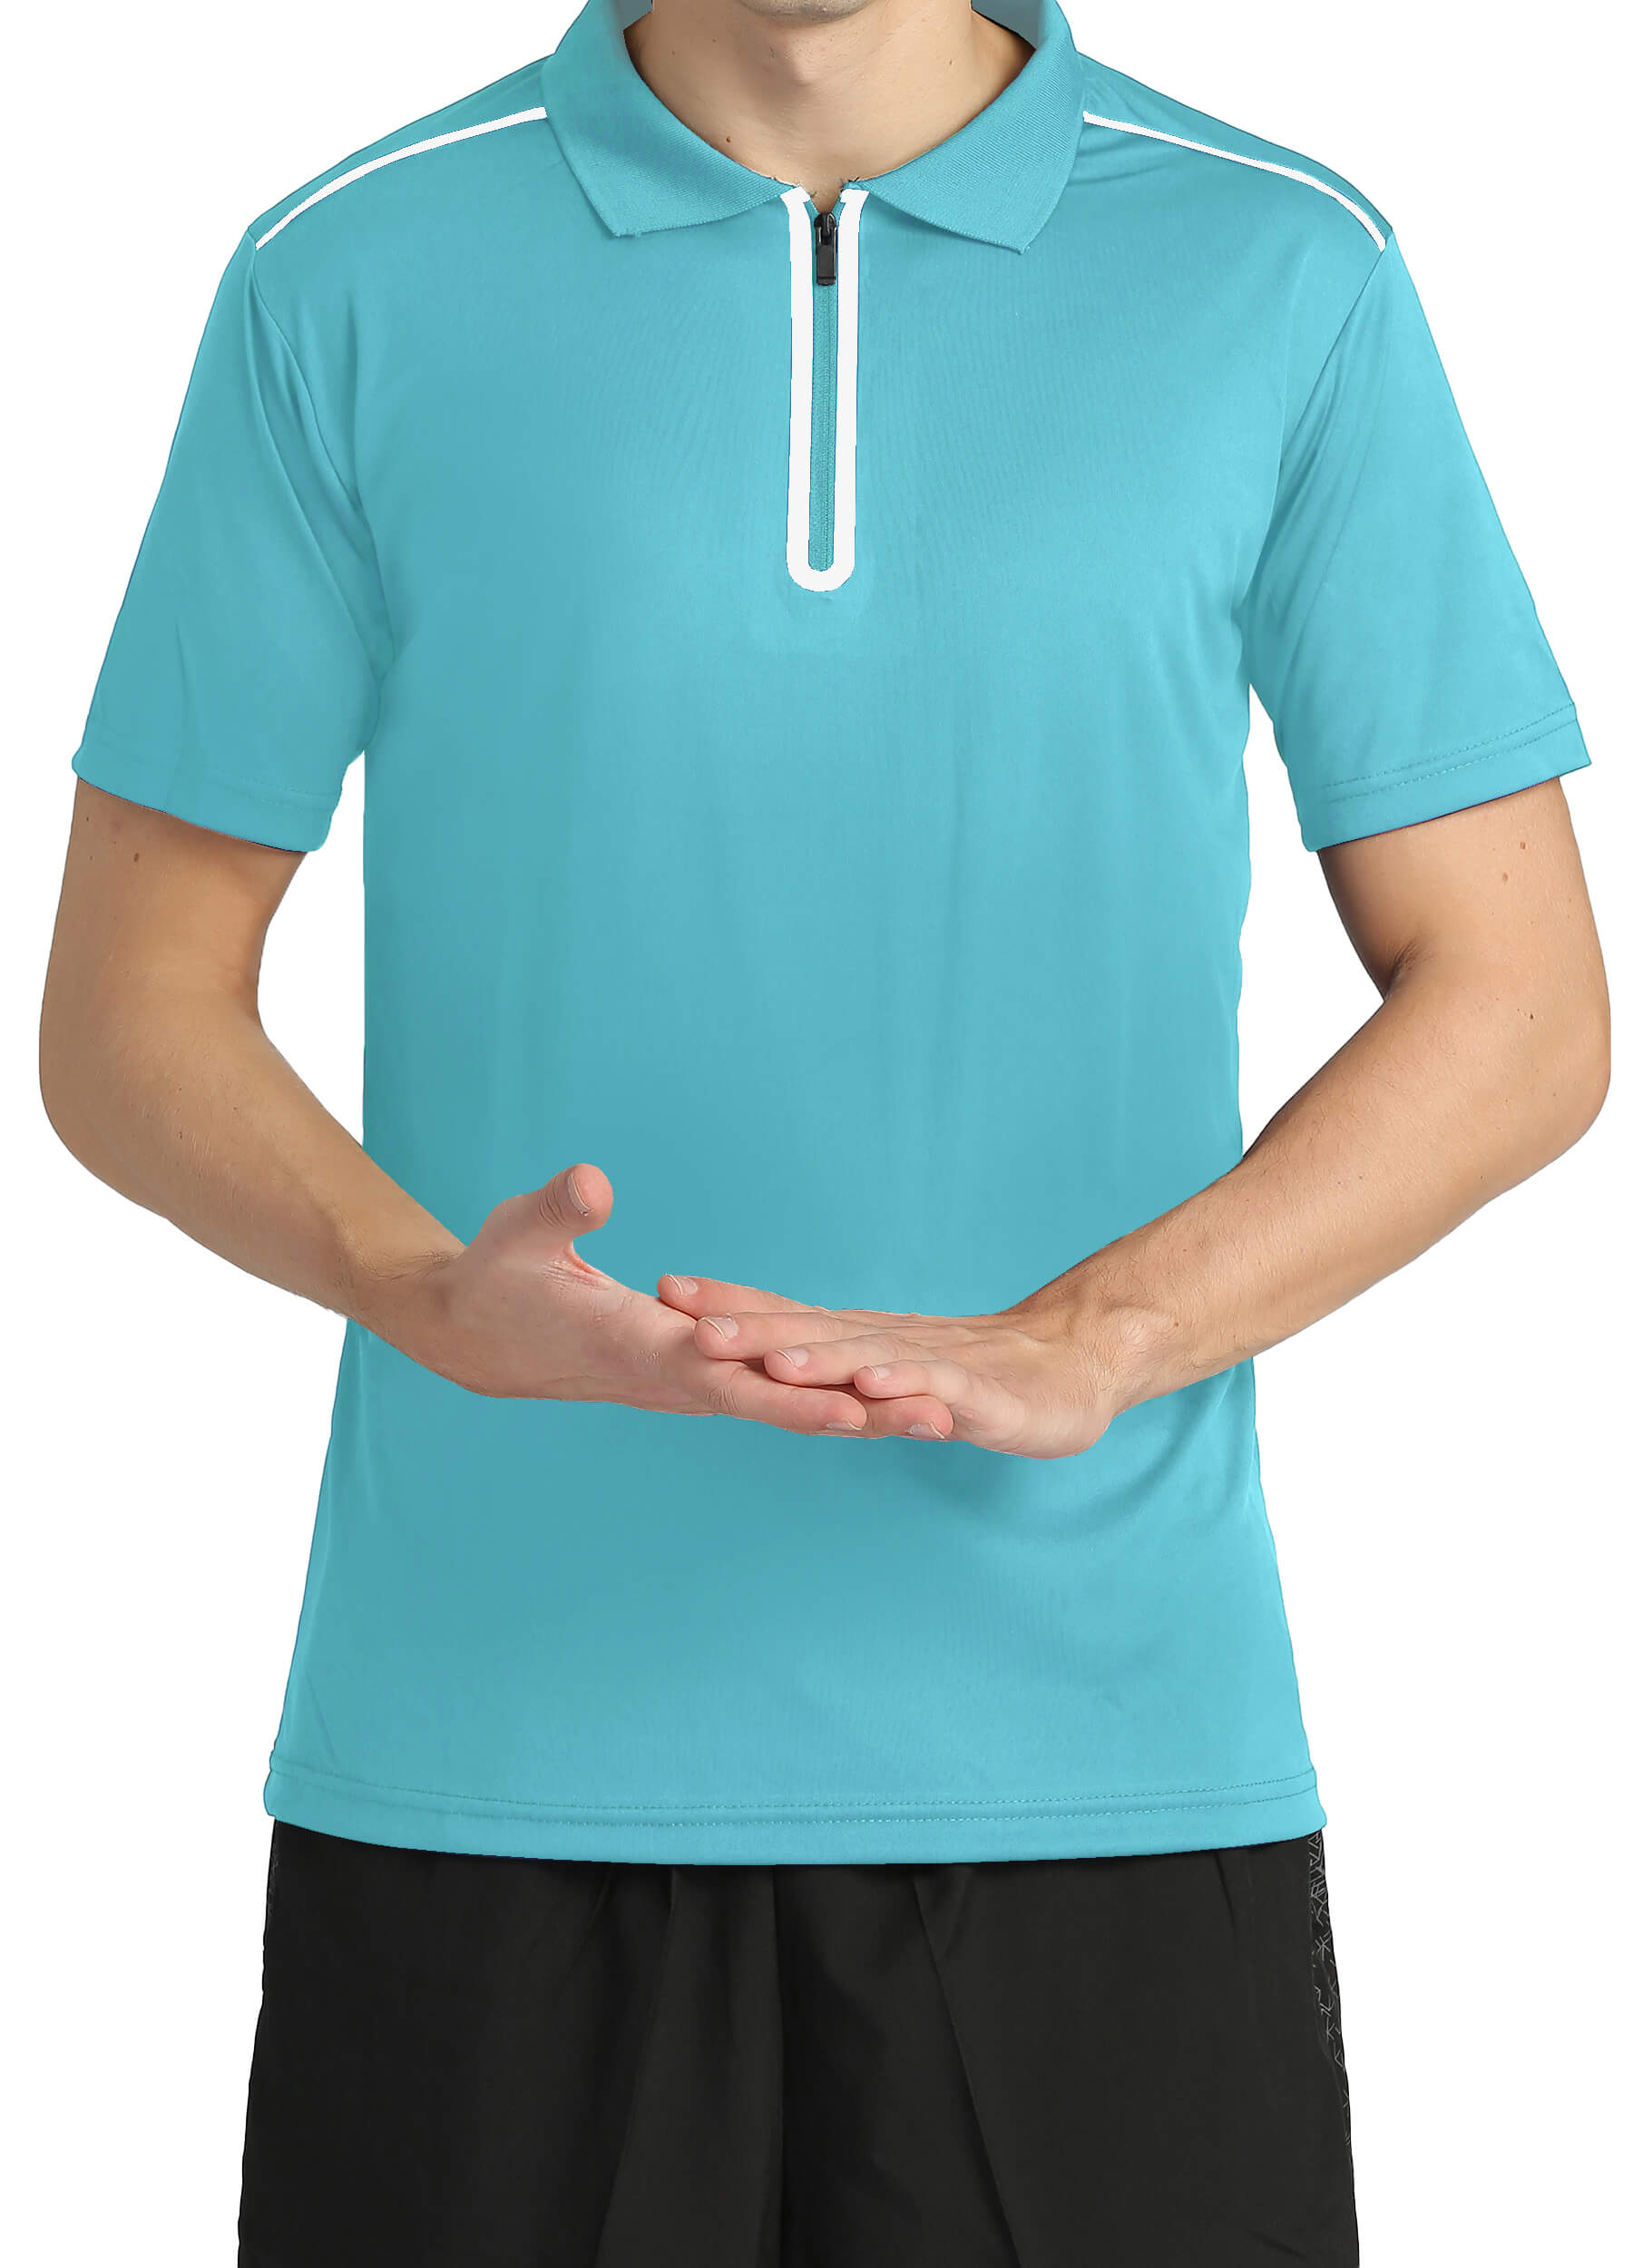 4POSE Men's Light Blue Moisture Wicking Quick Dry Golf Workout Polo Shirt (Clearance)